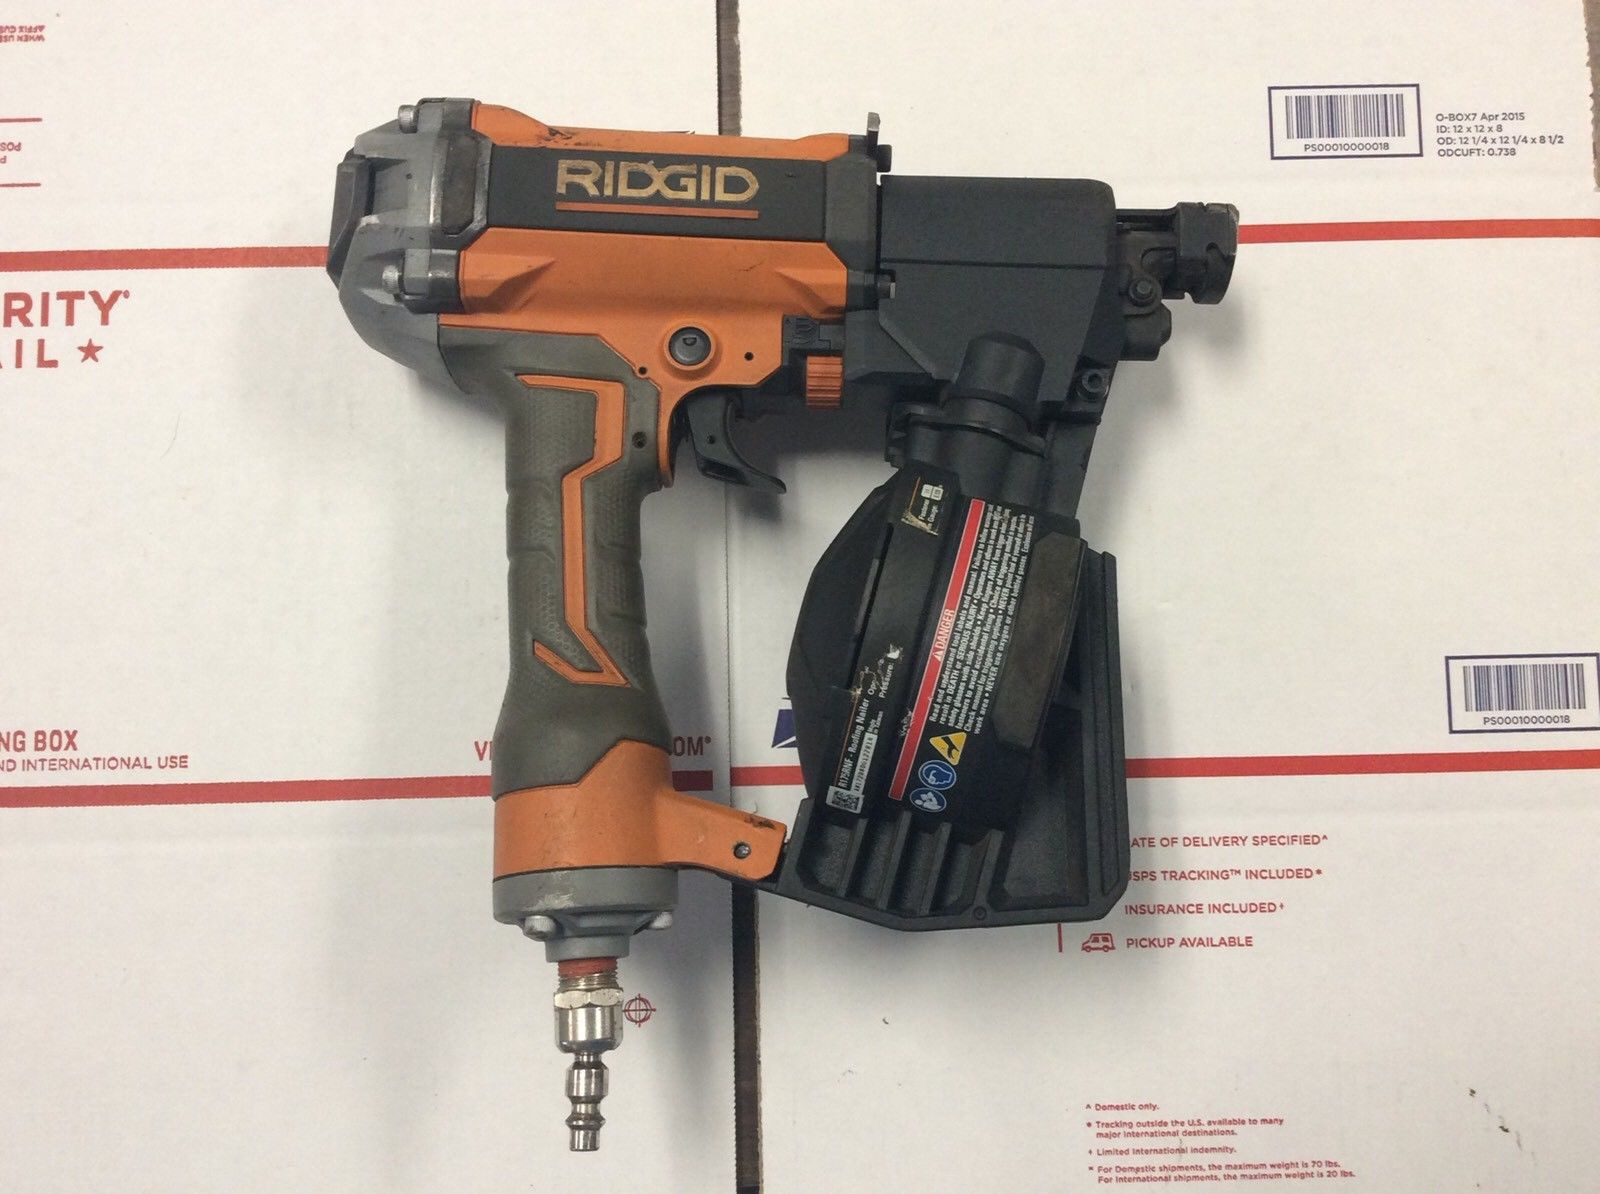 20 Cute Hardwood Floor Nail Gun 2022 free download hardwood floor nail gun of ridgid r175rnf 15 degree 1 3 4 in air coil roofing nailer ebay intended for s l1600